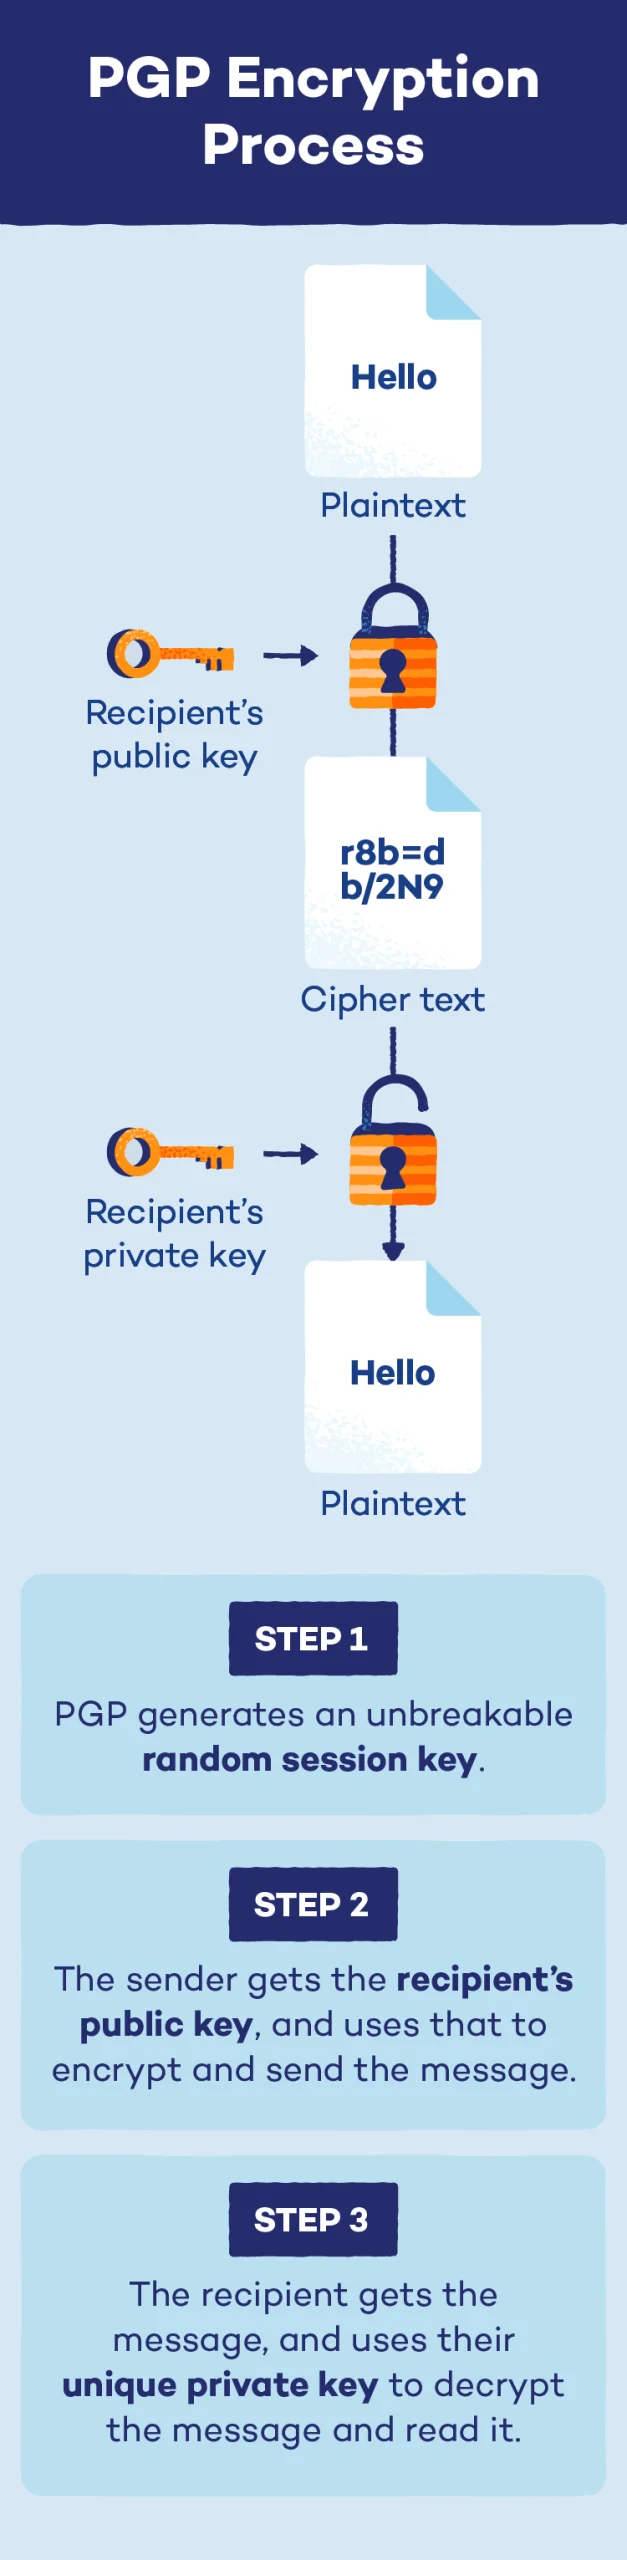 PGP encryption process